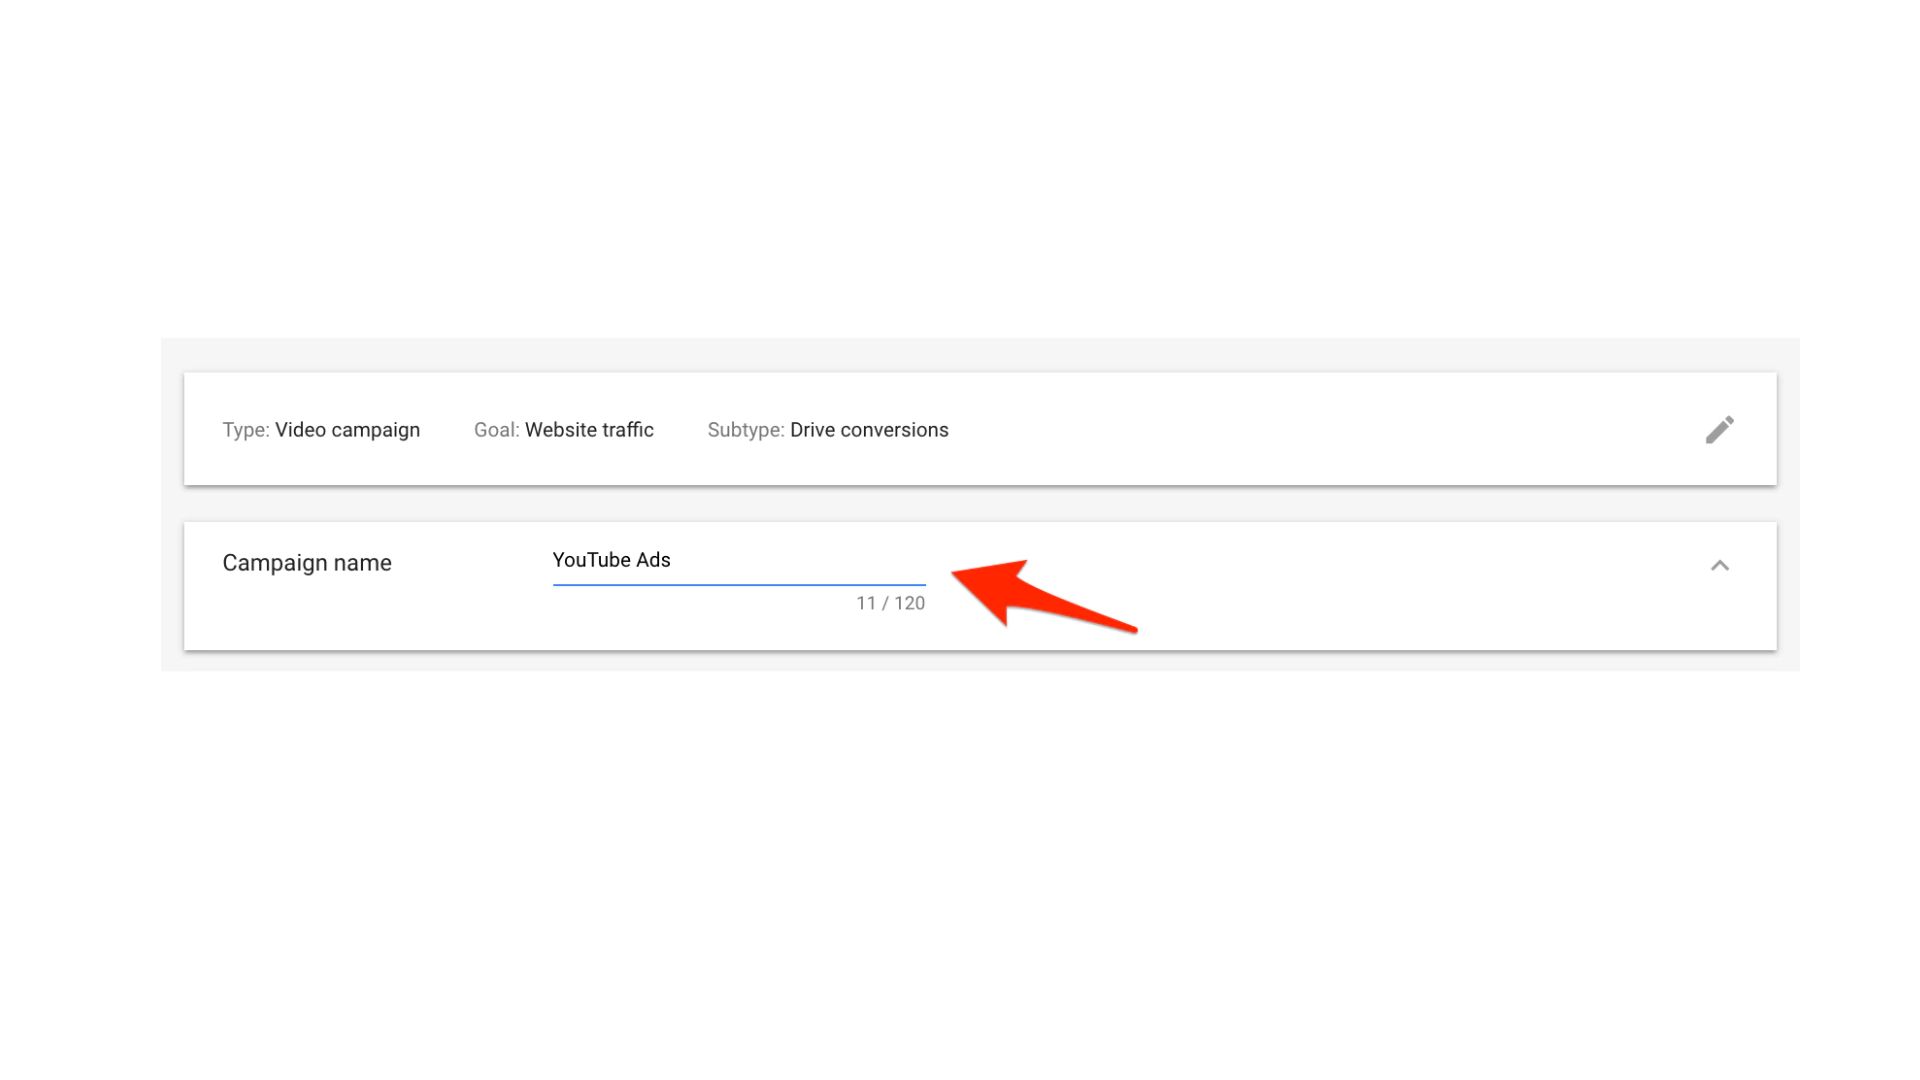 Configure Your Campaign for YouTube Ads